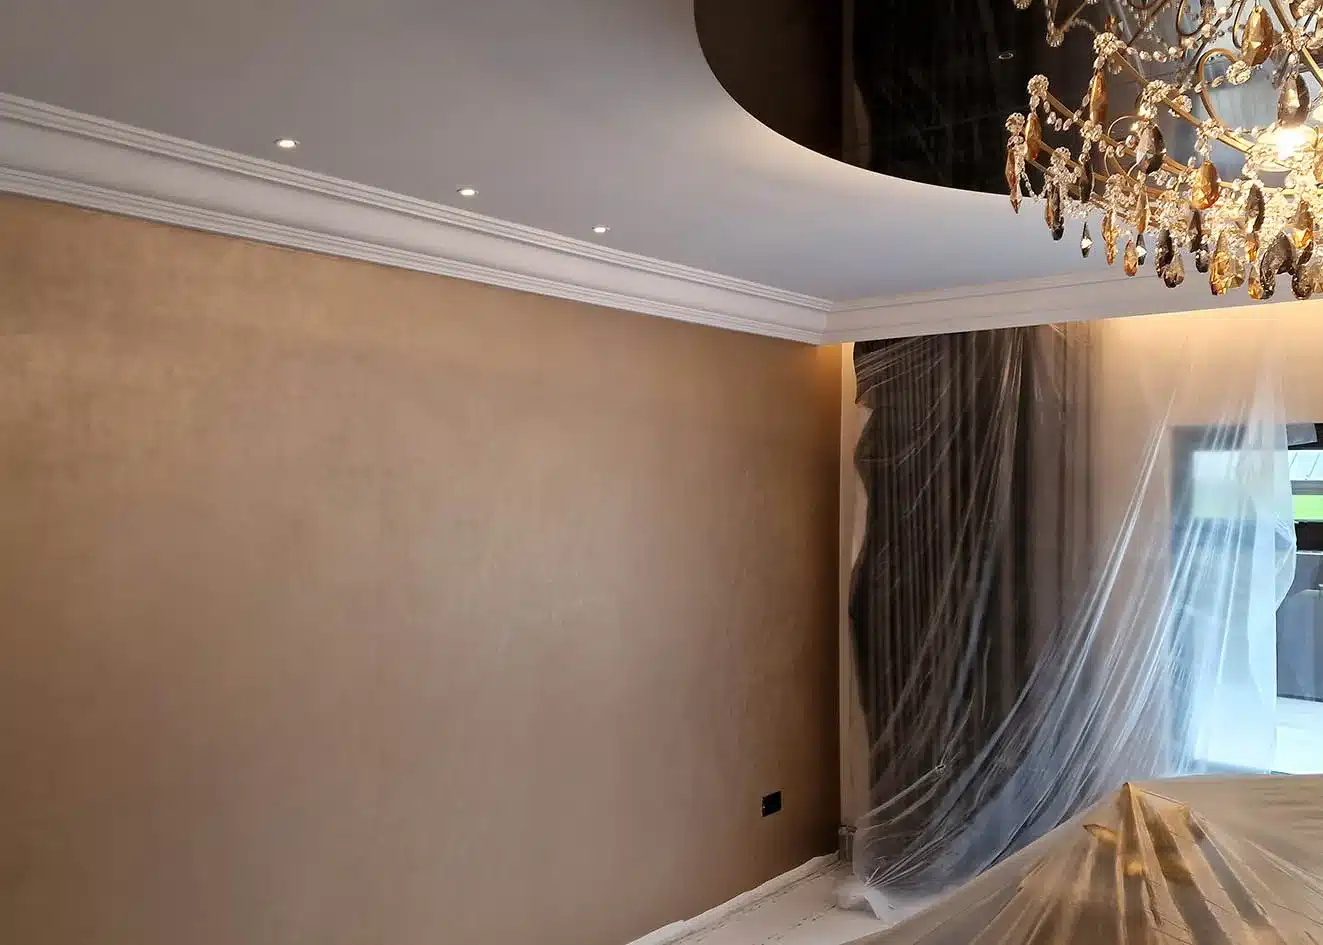 Tektura Luxe metallic wallcovering installed by Bluespec Decorating Limited, London.